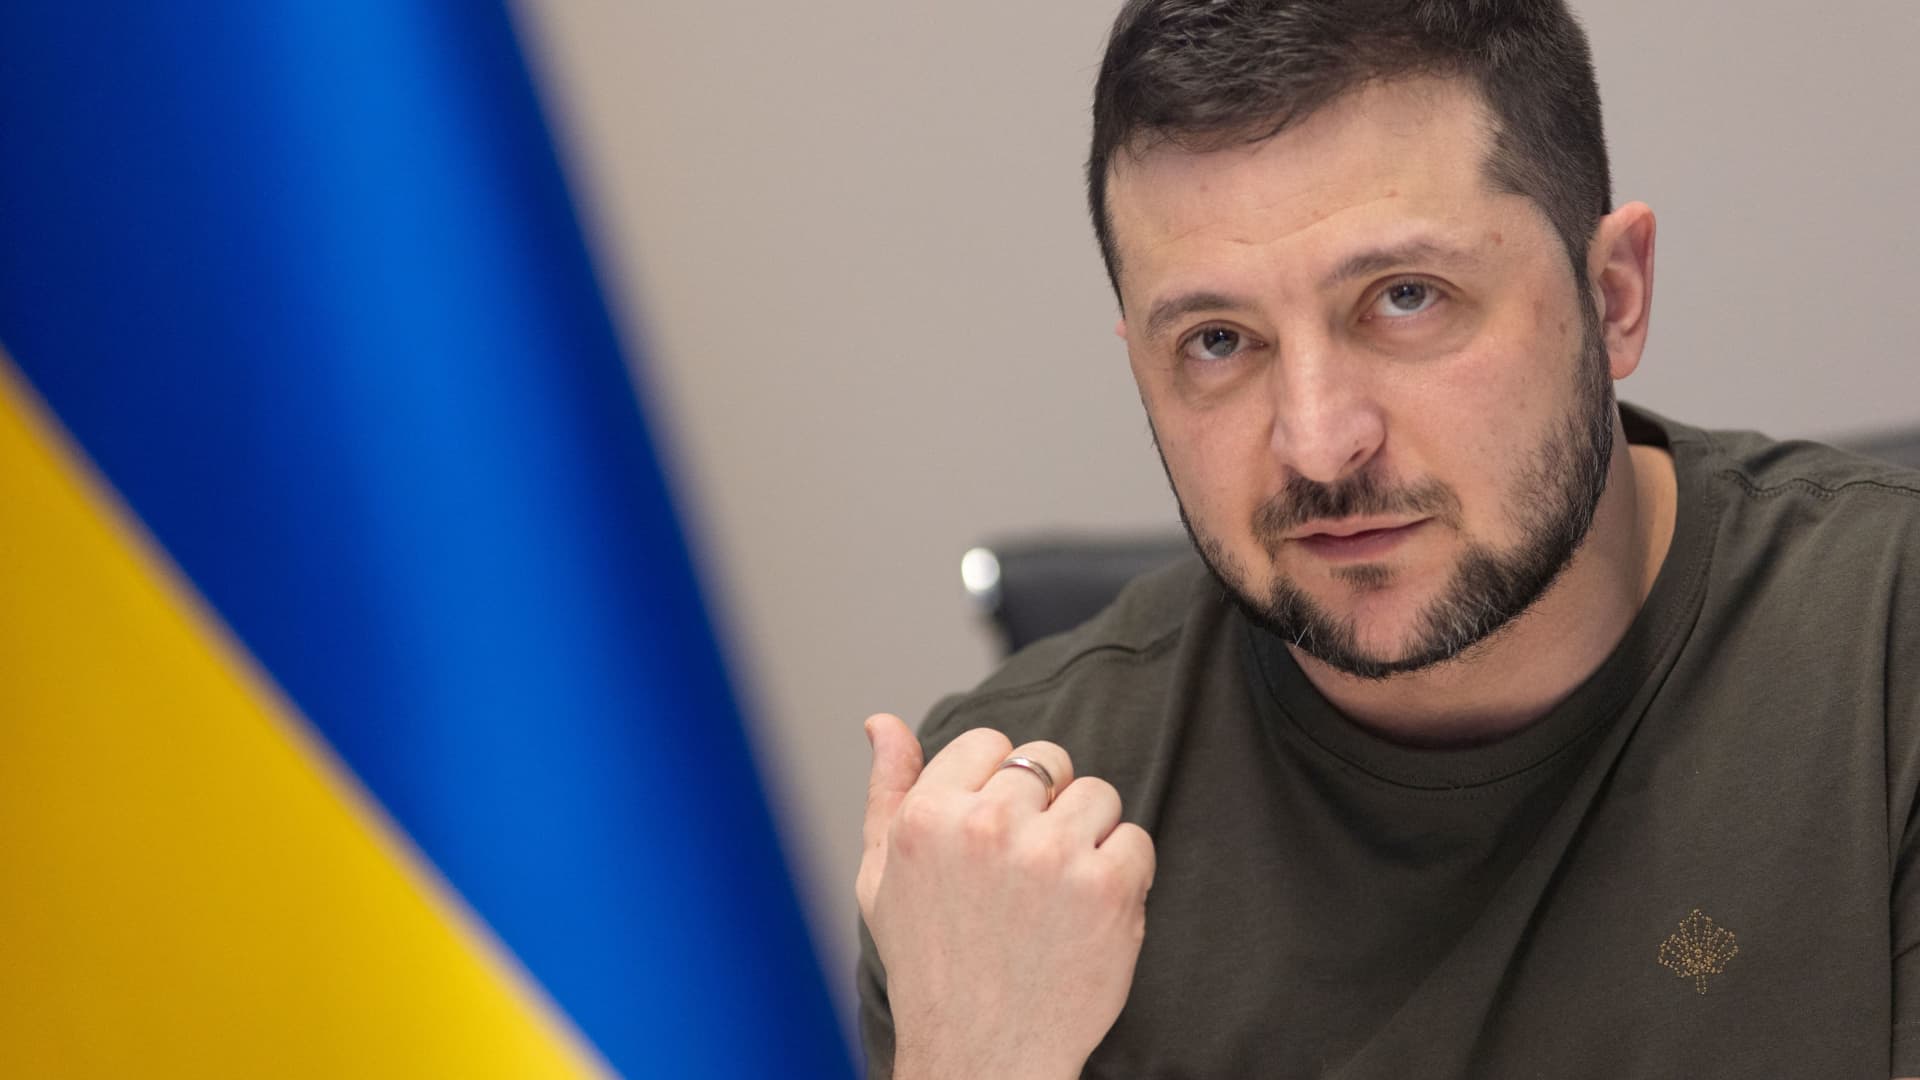 Ukraine's President Volodymyr Zelenskyy attends an interview with some of the Russian media via videolink, as Russia?s attack on Ukraine continues, in Kyiv, Ukraine March 27, 2022.